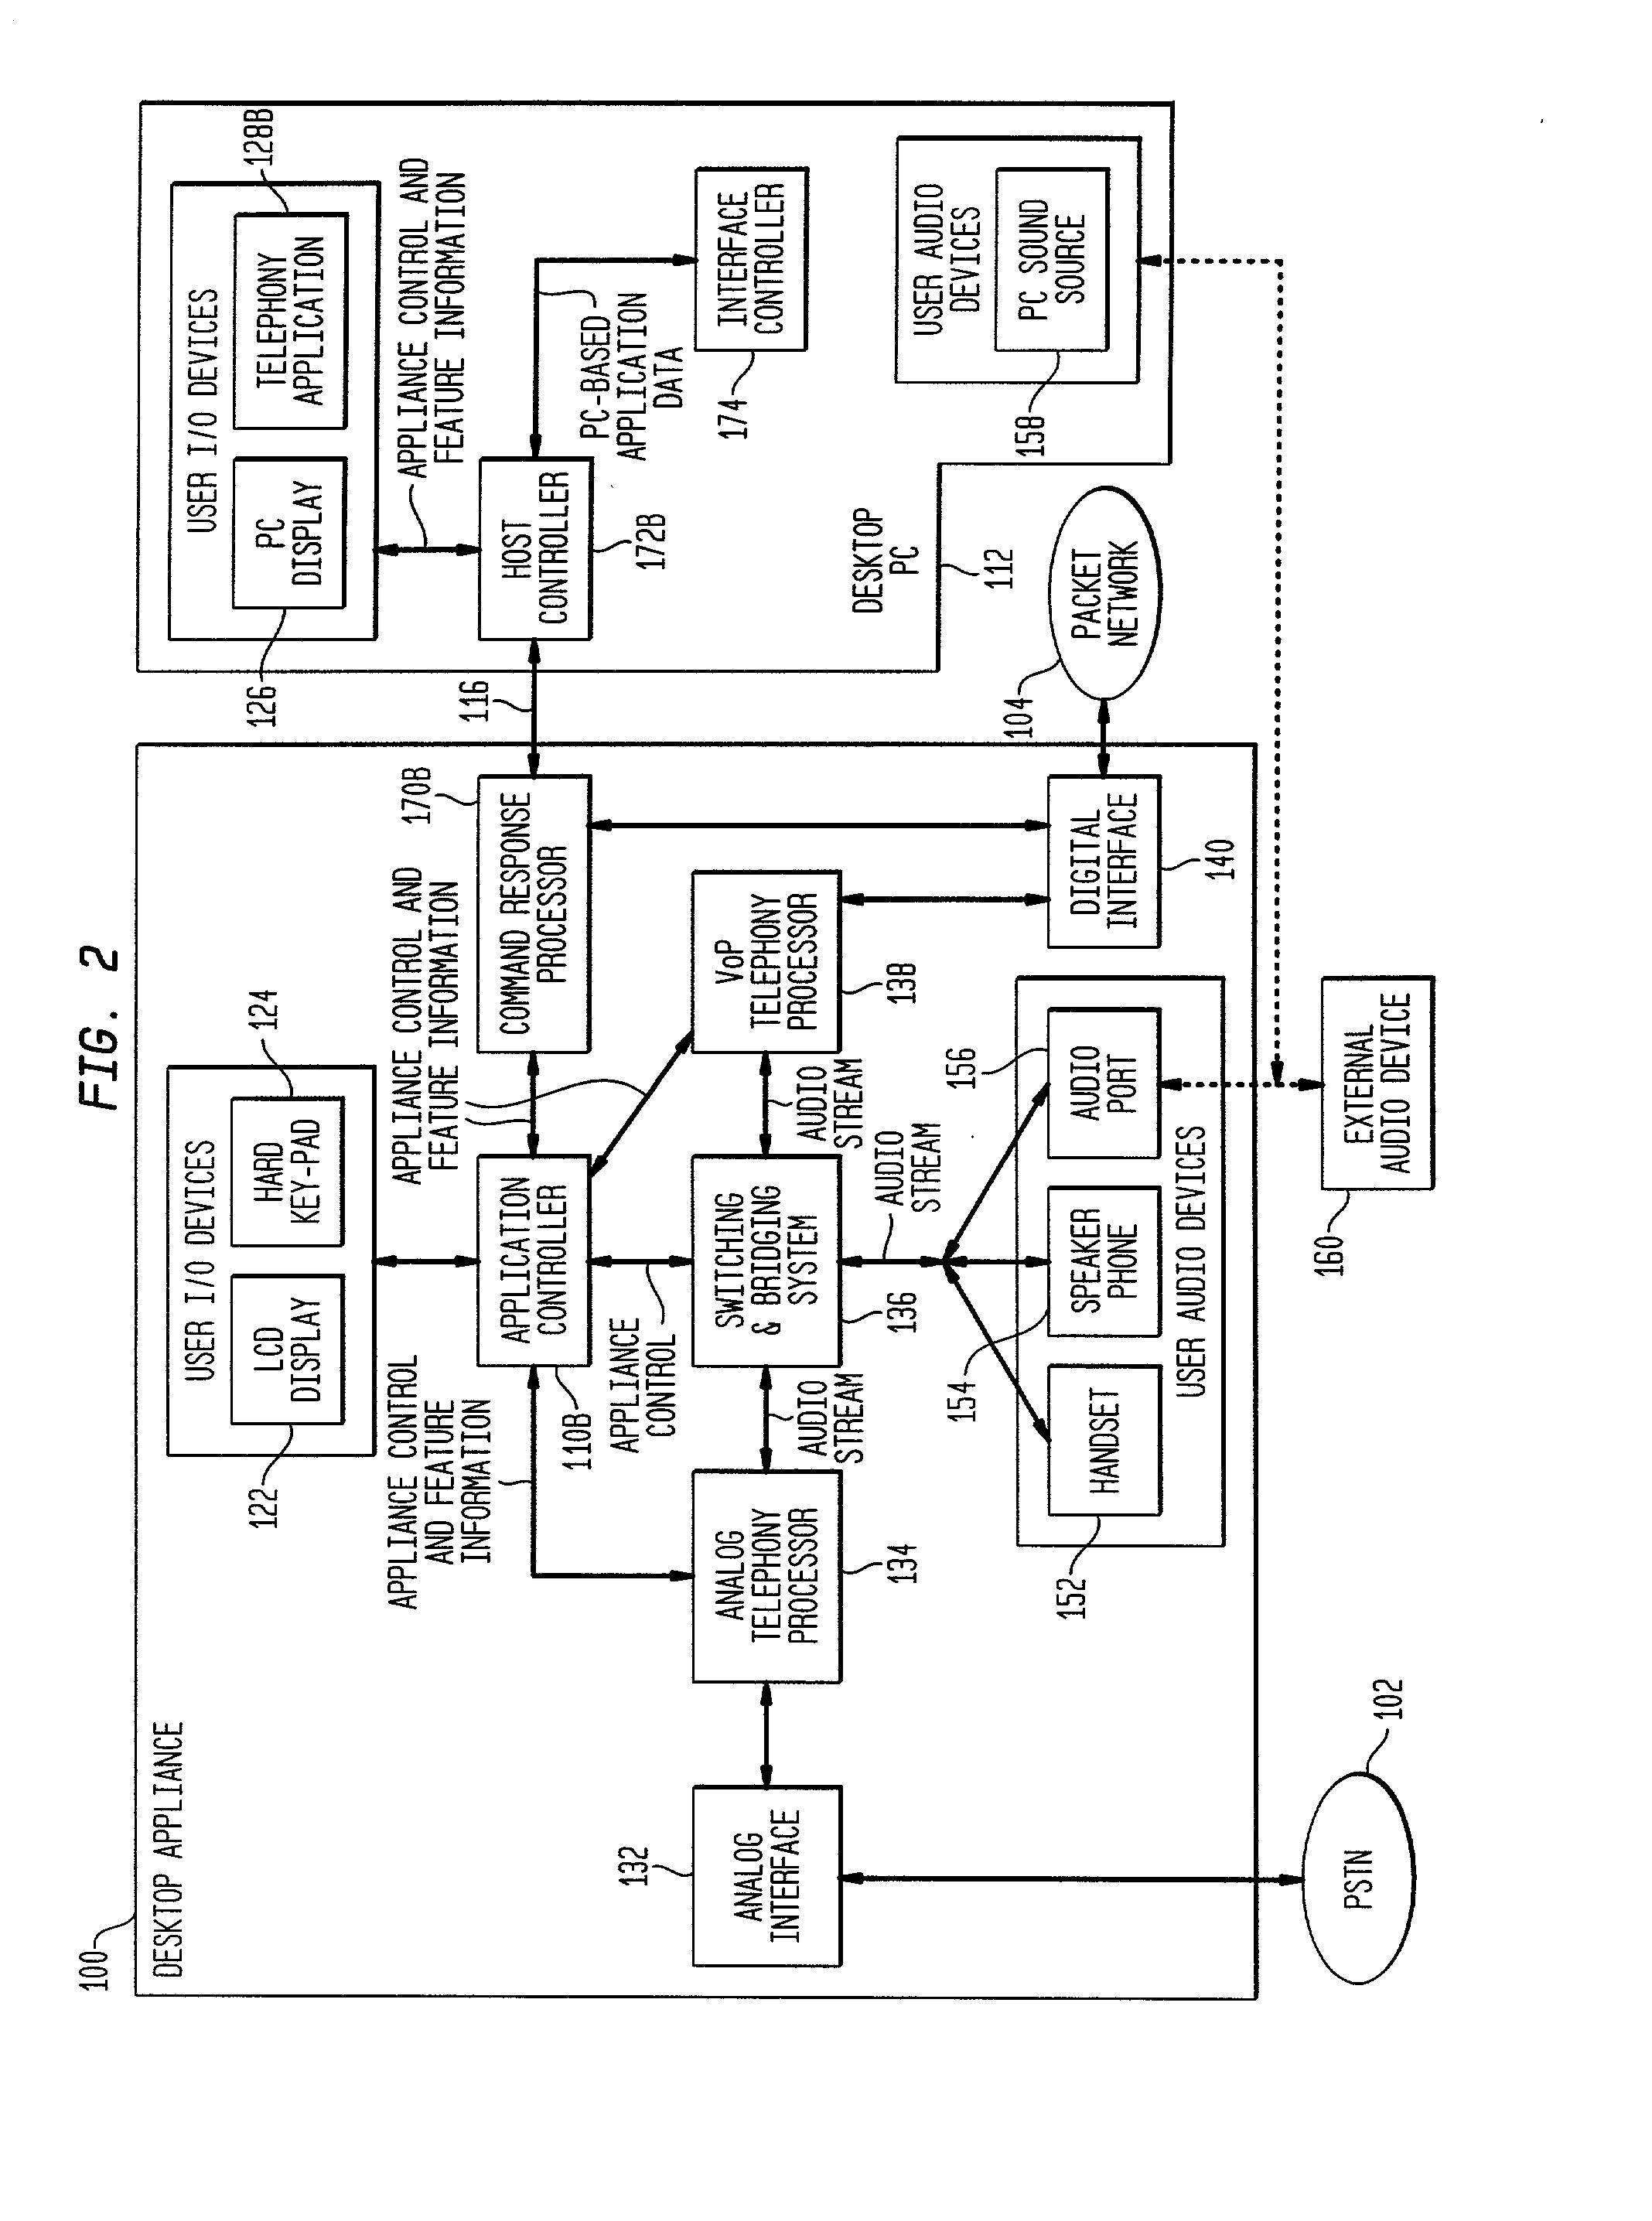 Interconnecting voice-over-packet and analog telephony at a desktop